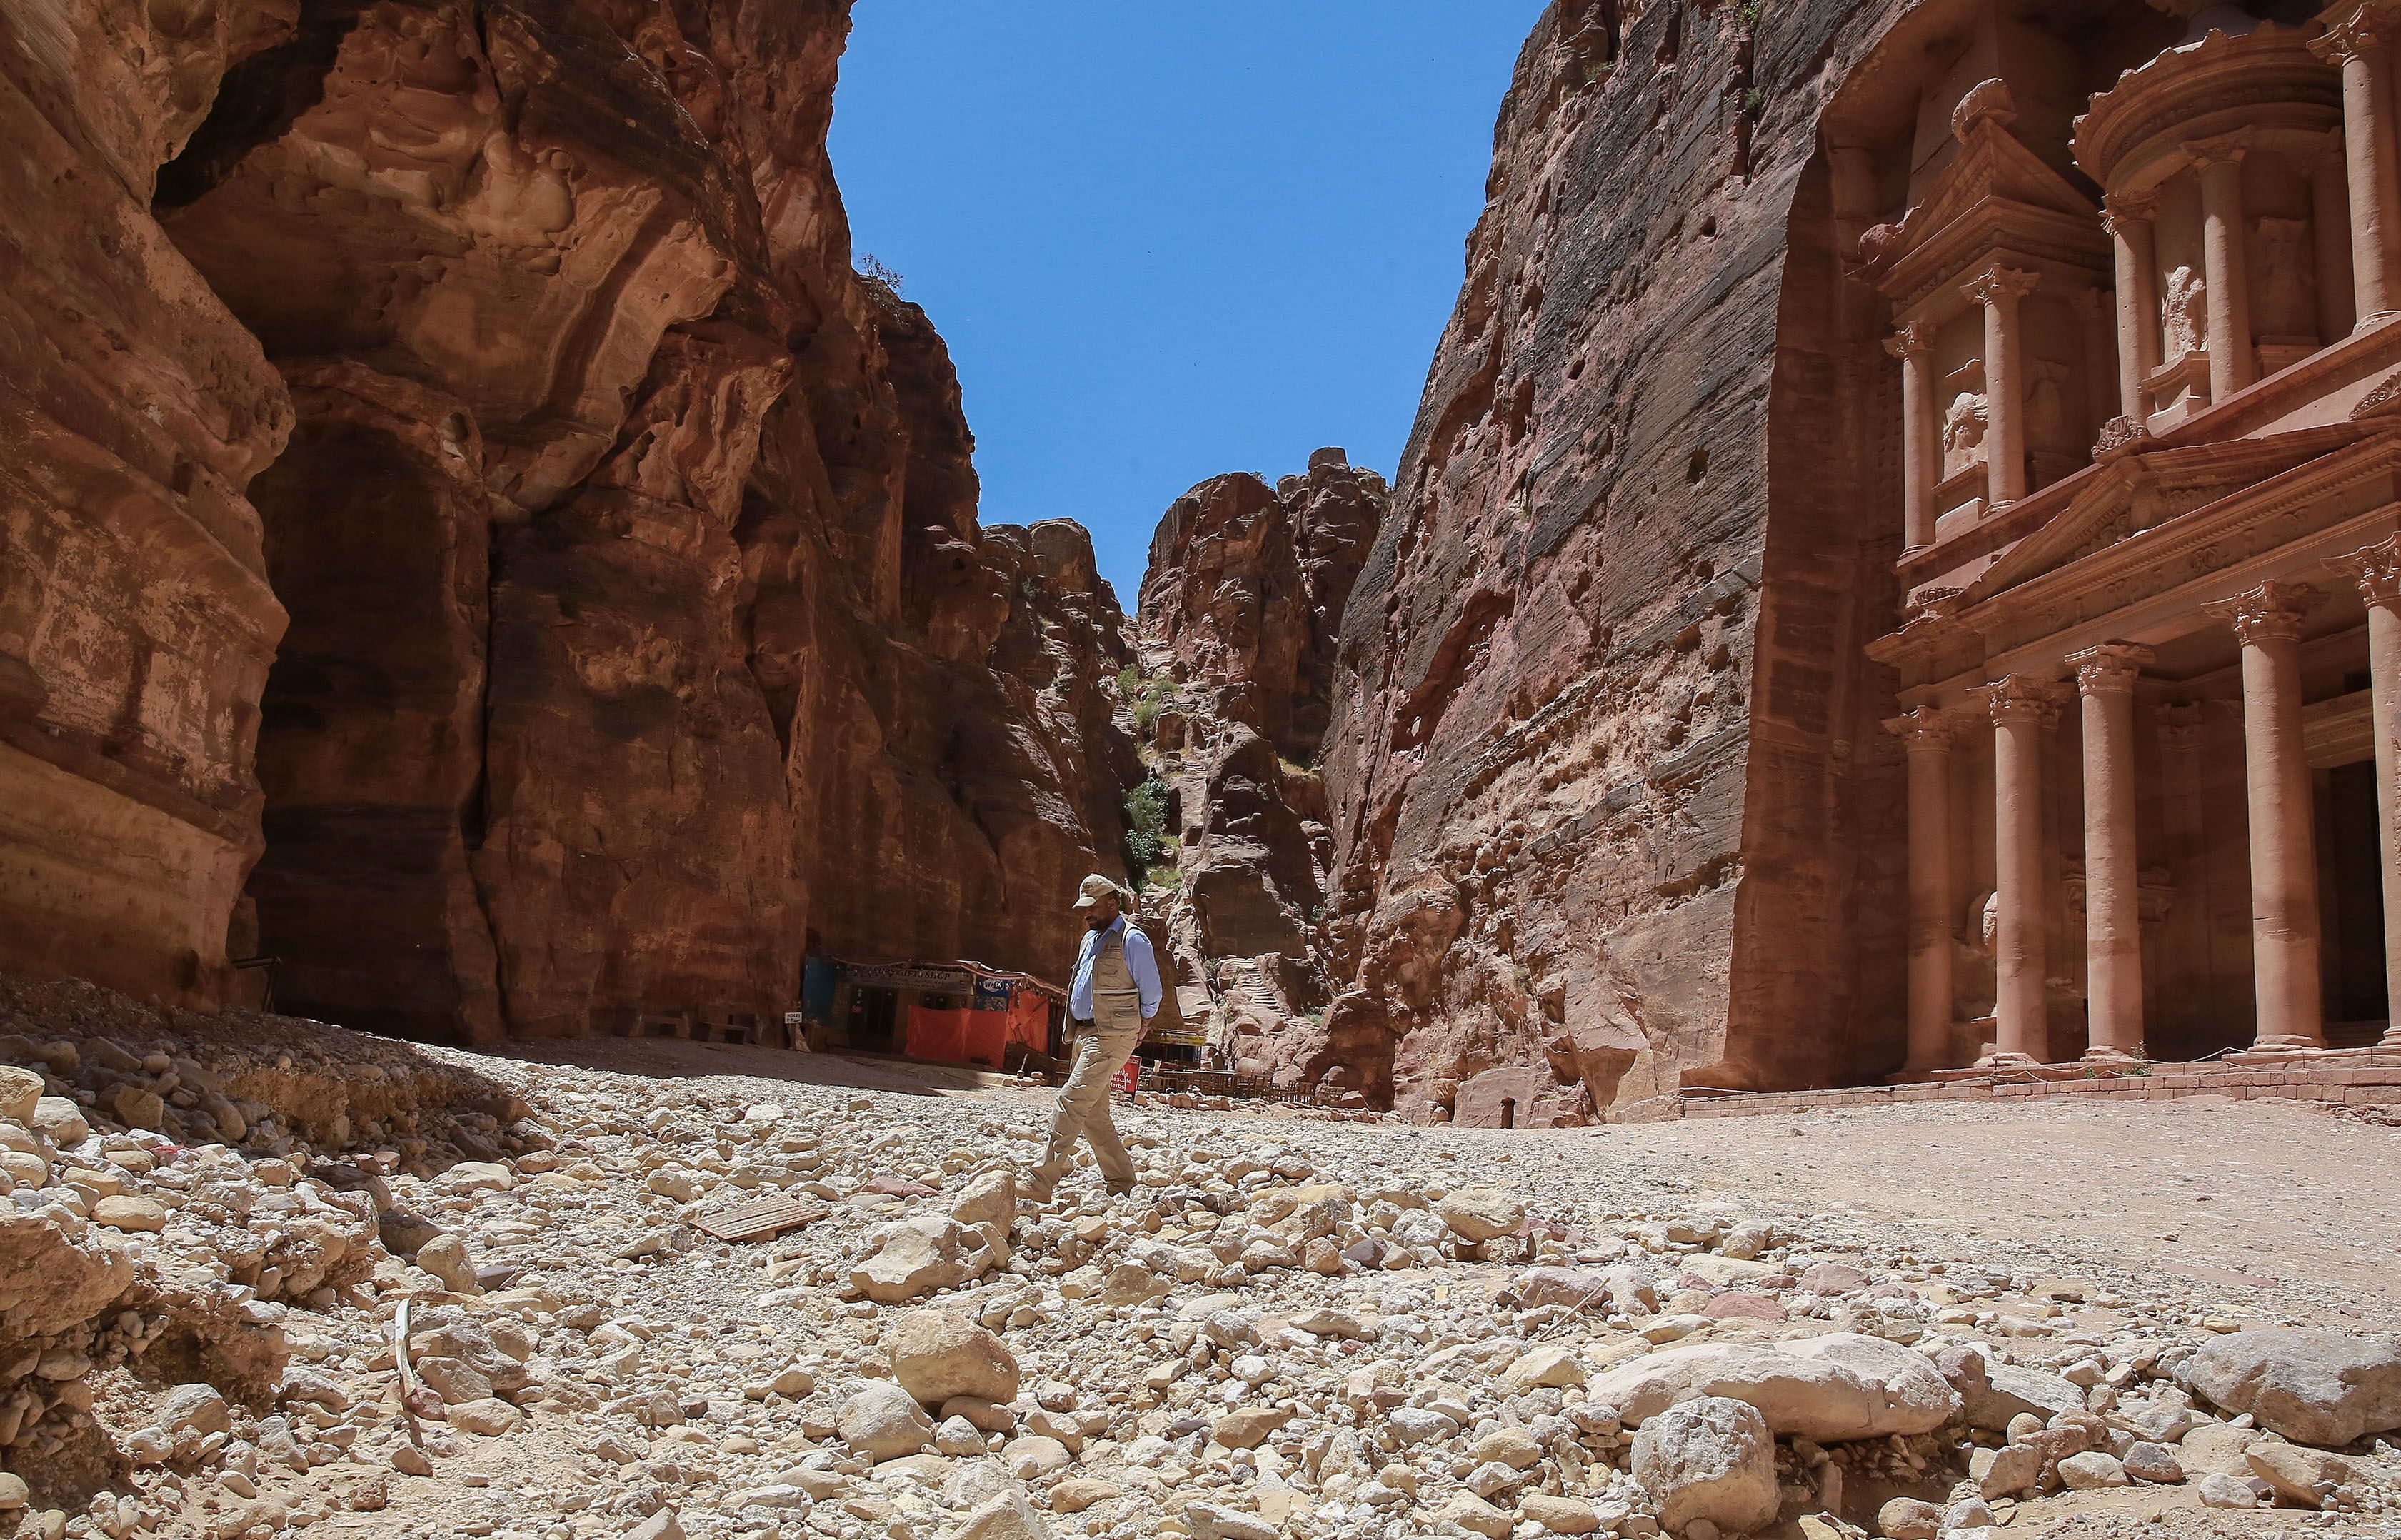 For over two millennia the ancient city of Petra has towered majestically over the Jordanian desert. Today its famed rose-red temples hewn into the rockface lie empty and silent. Credit: AFP Photo